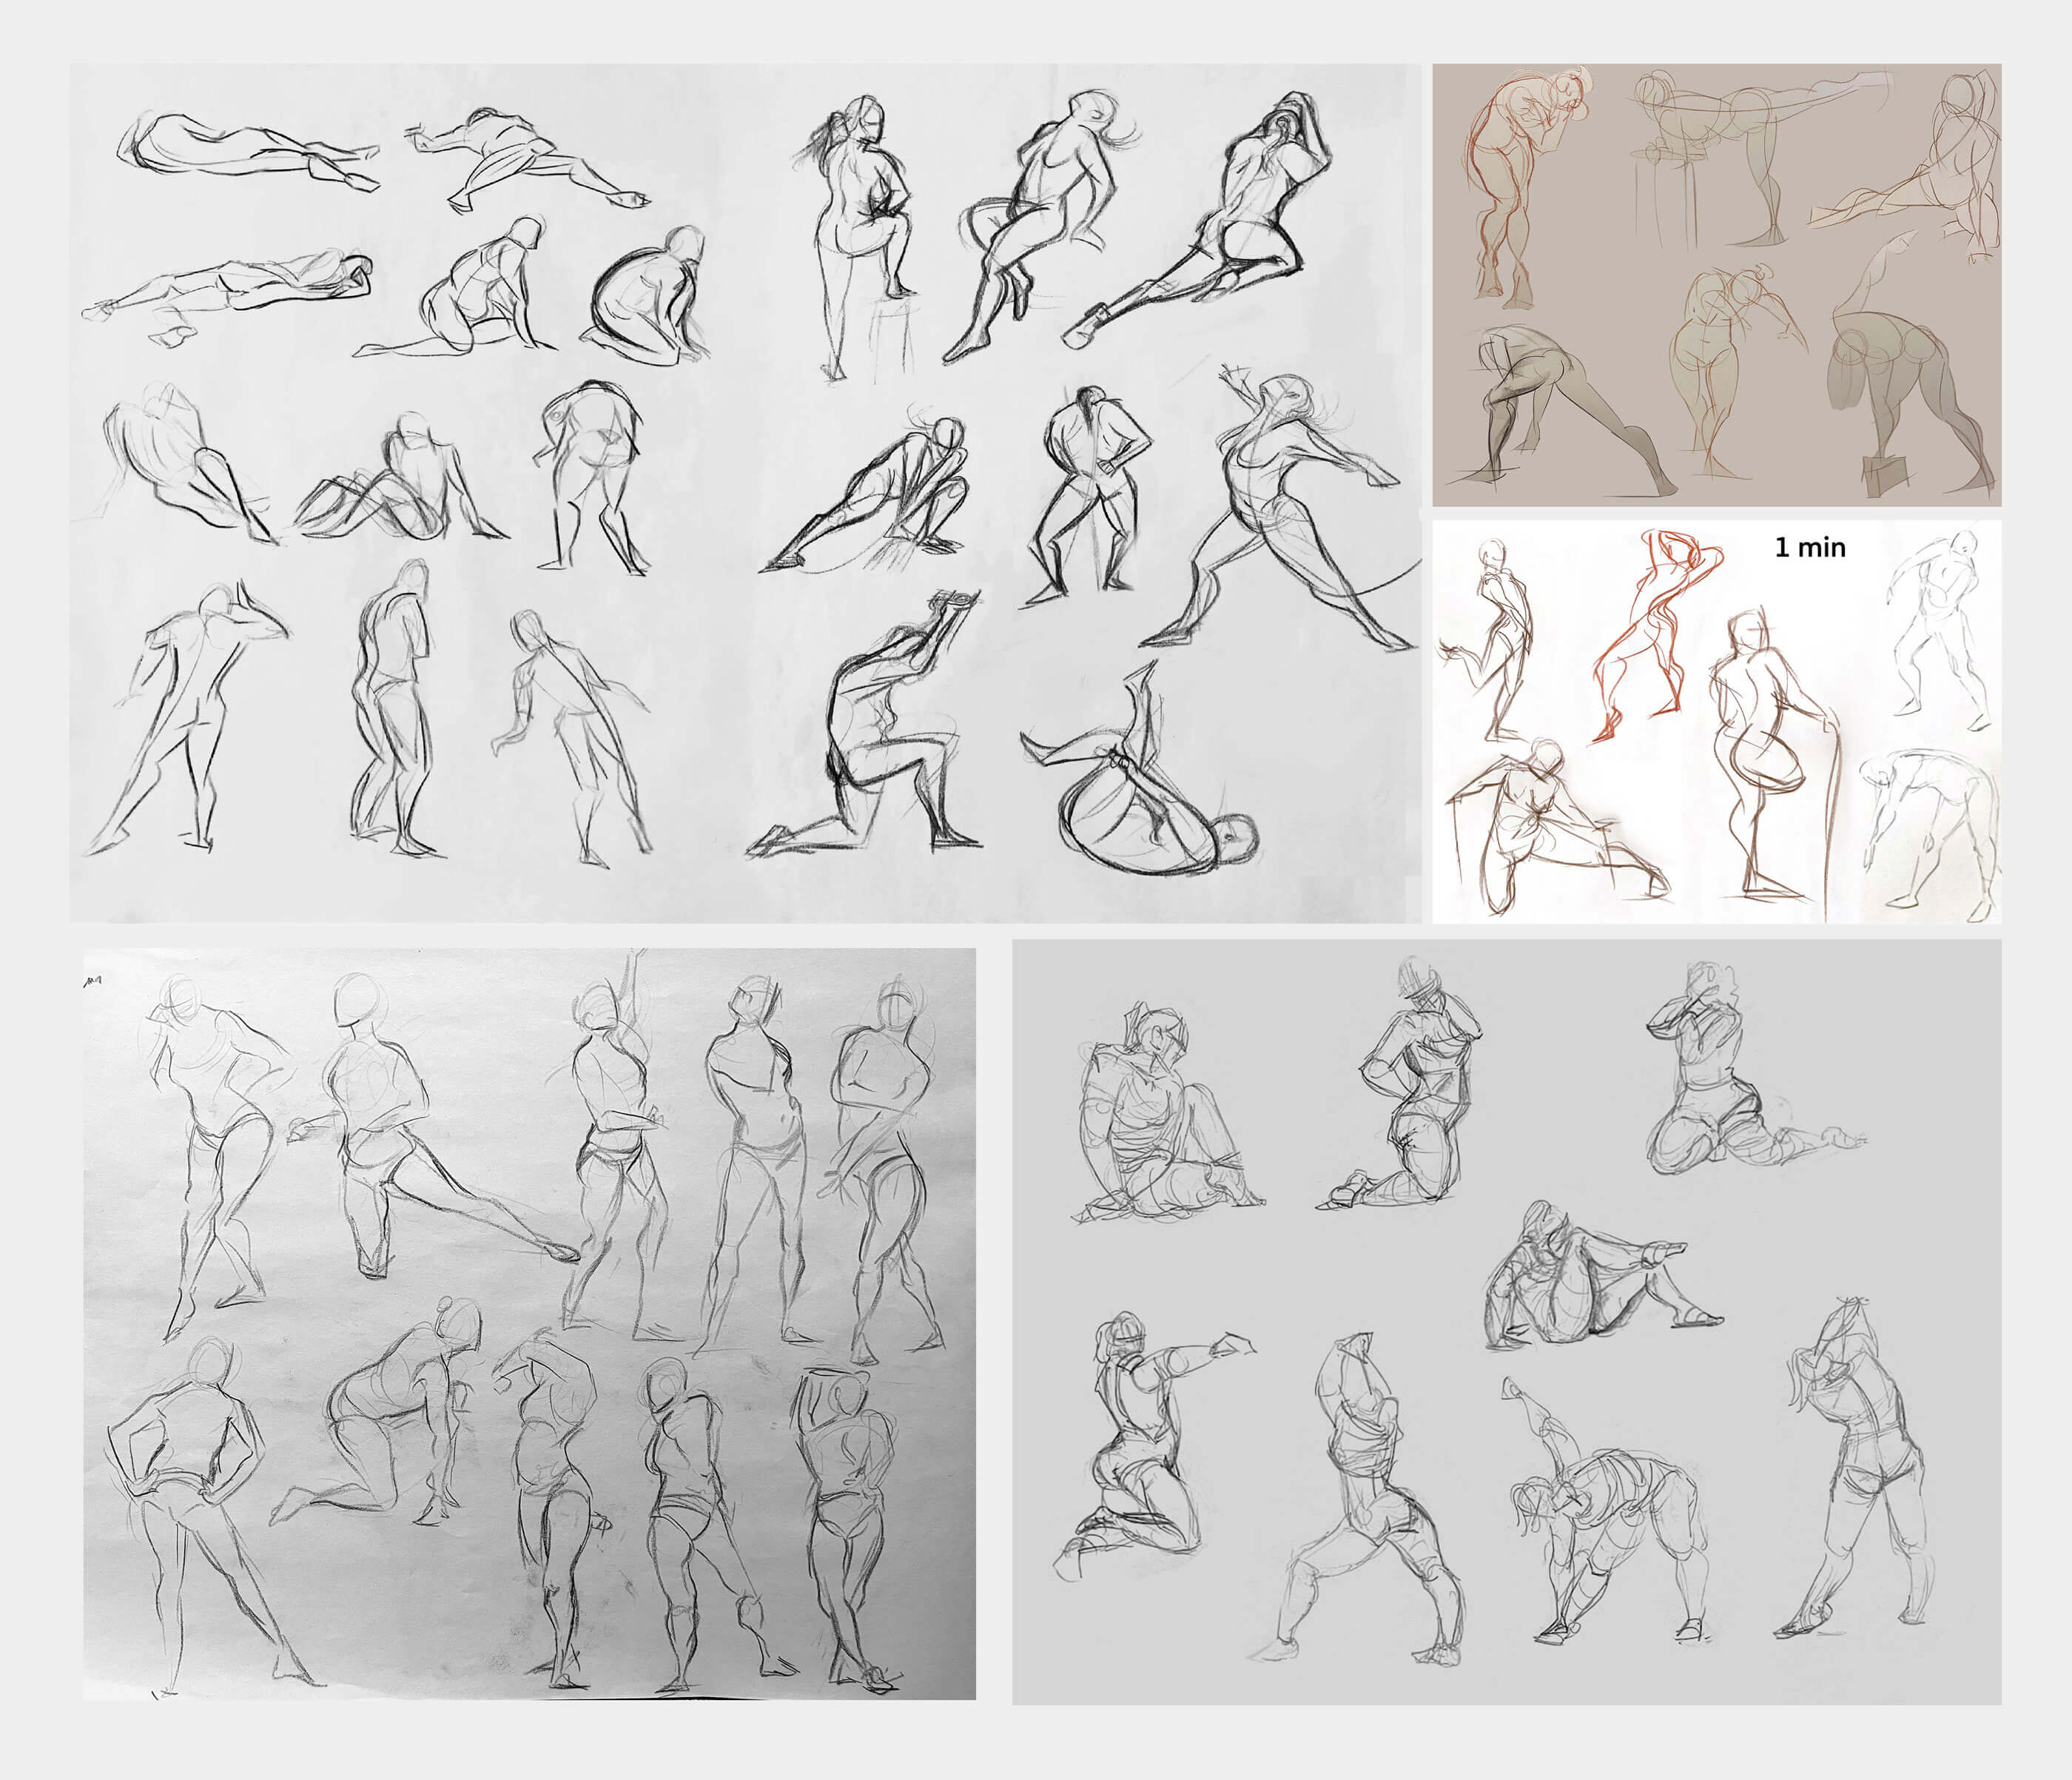 Sketch of a woman in various poses and actions.